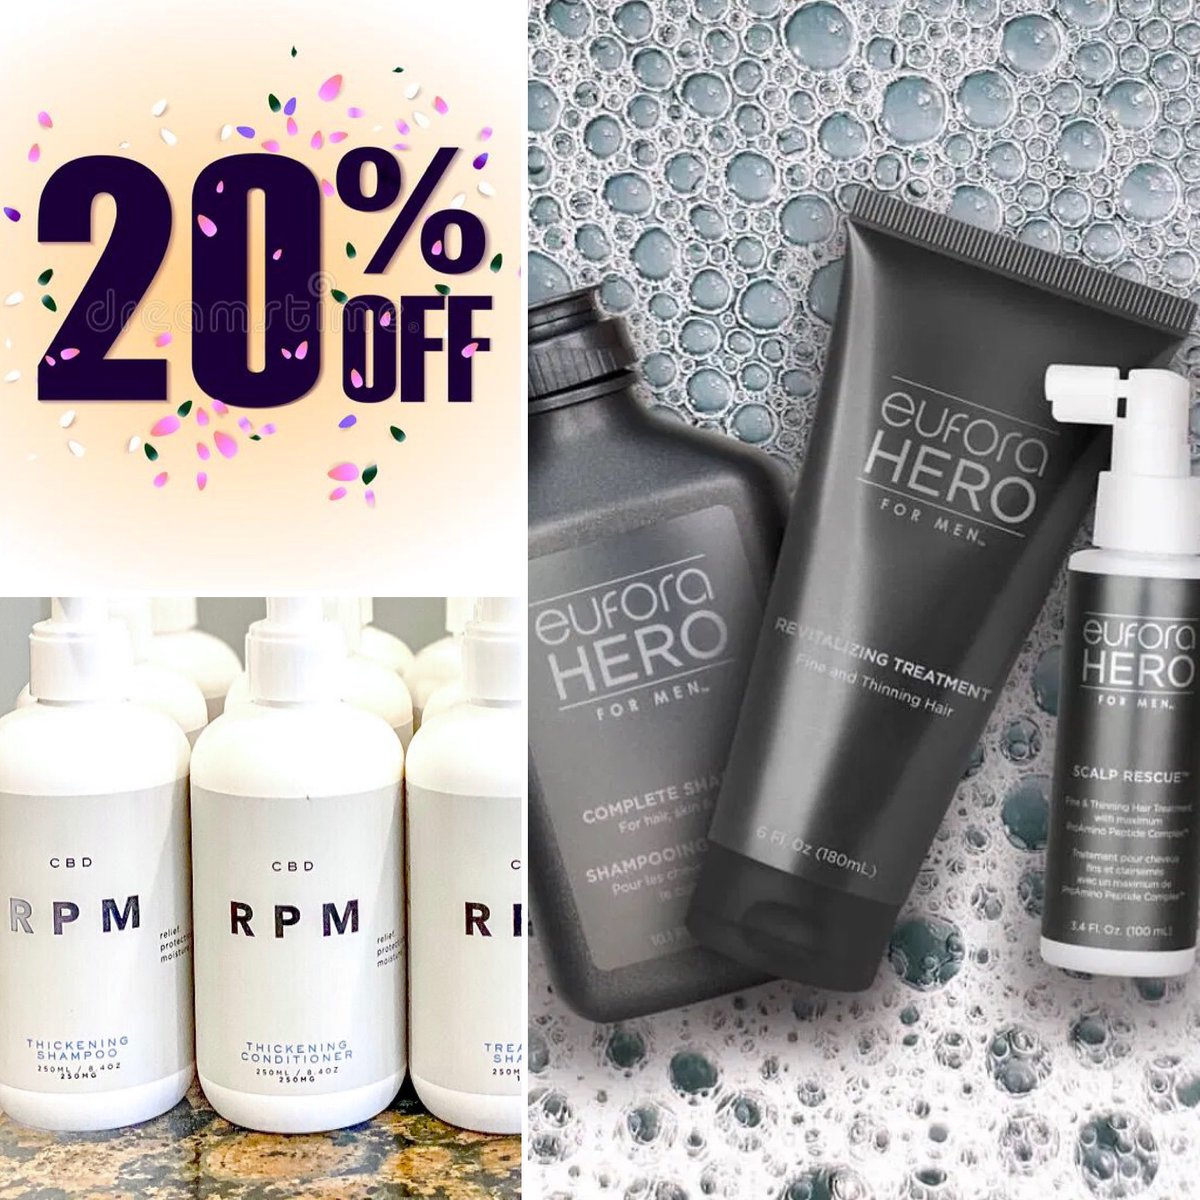 Let’s not forget the men!! All #menshairproducts are 20% off too, stock up now! 🛍🛍🛍

#euforahero & #rpmhaircare thickening! #menshair #mensgrooming #menshaircare #spring #sale #springsale  #hairproducts #shoplocal #shopsmall #supportsmallbusiness #supportlocal #exeternhhair